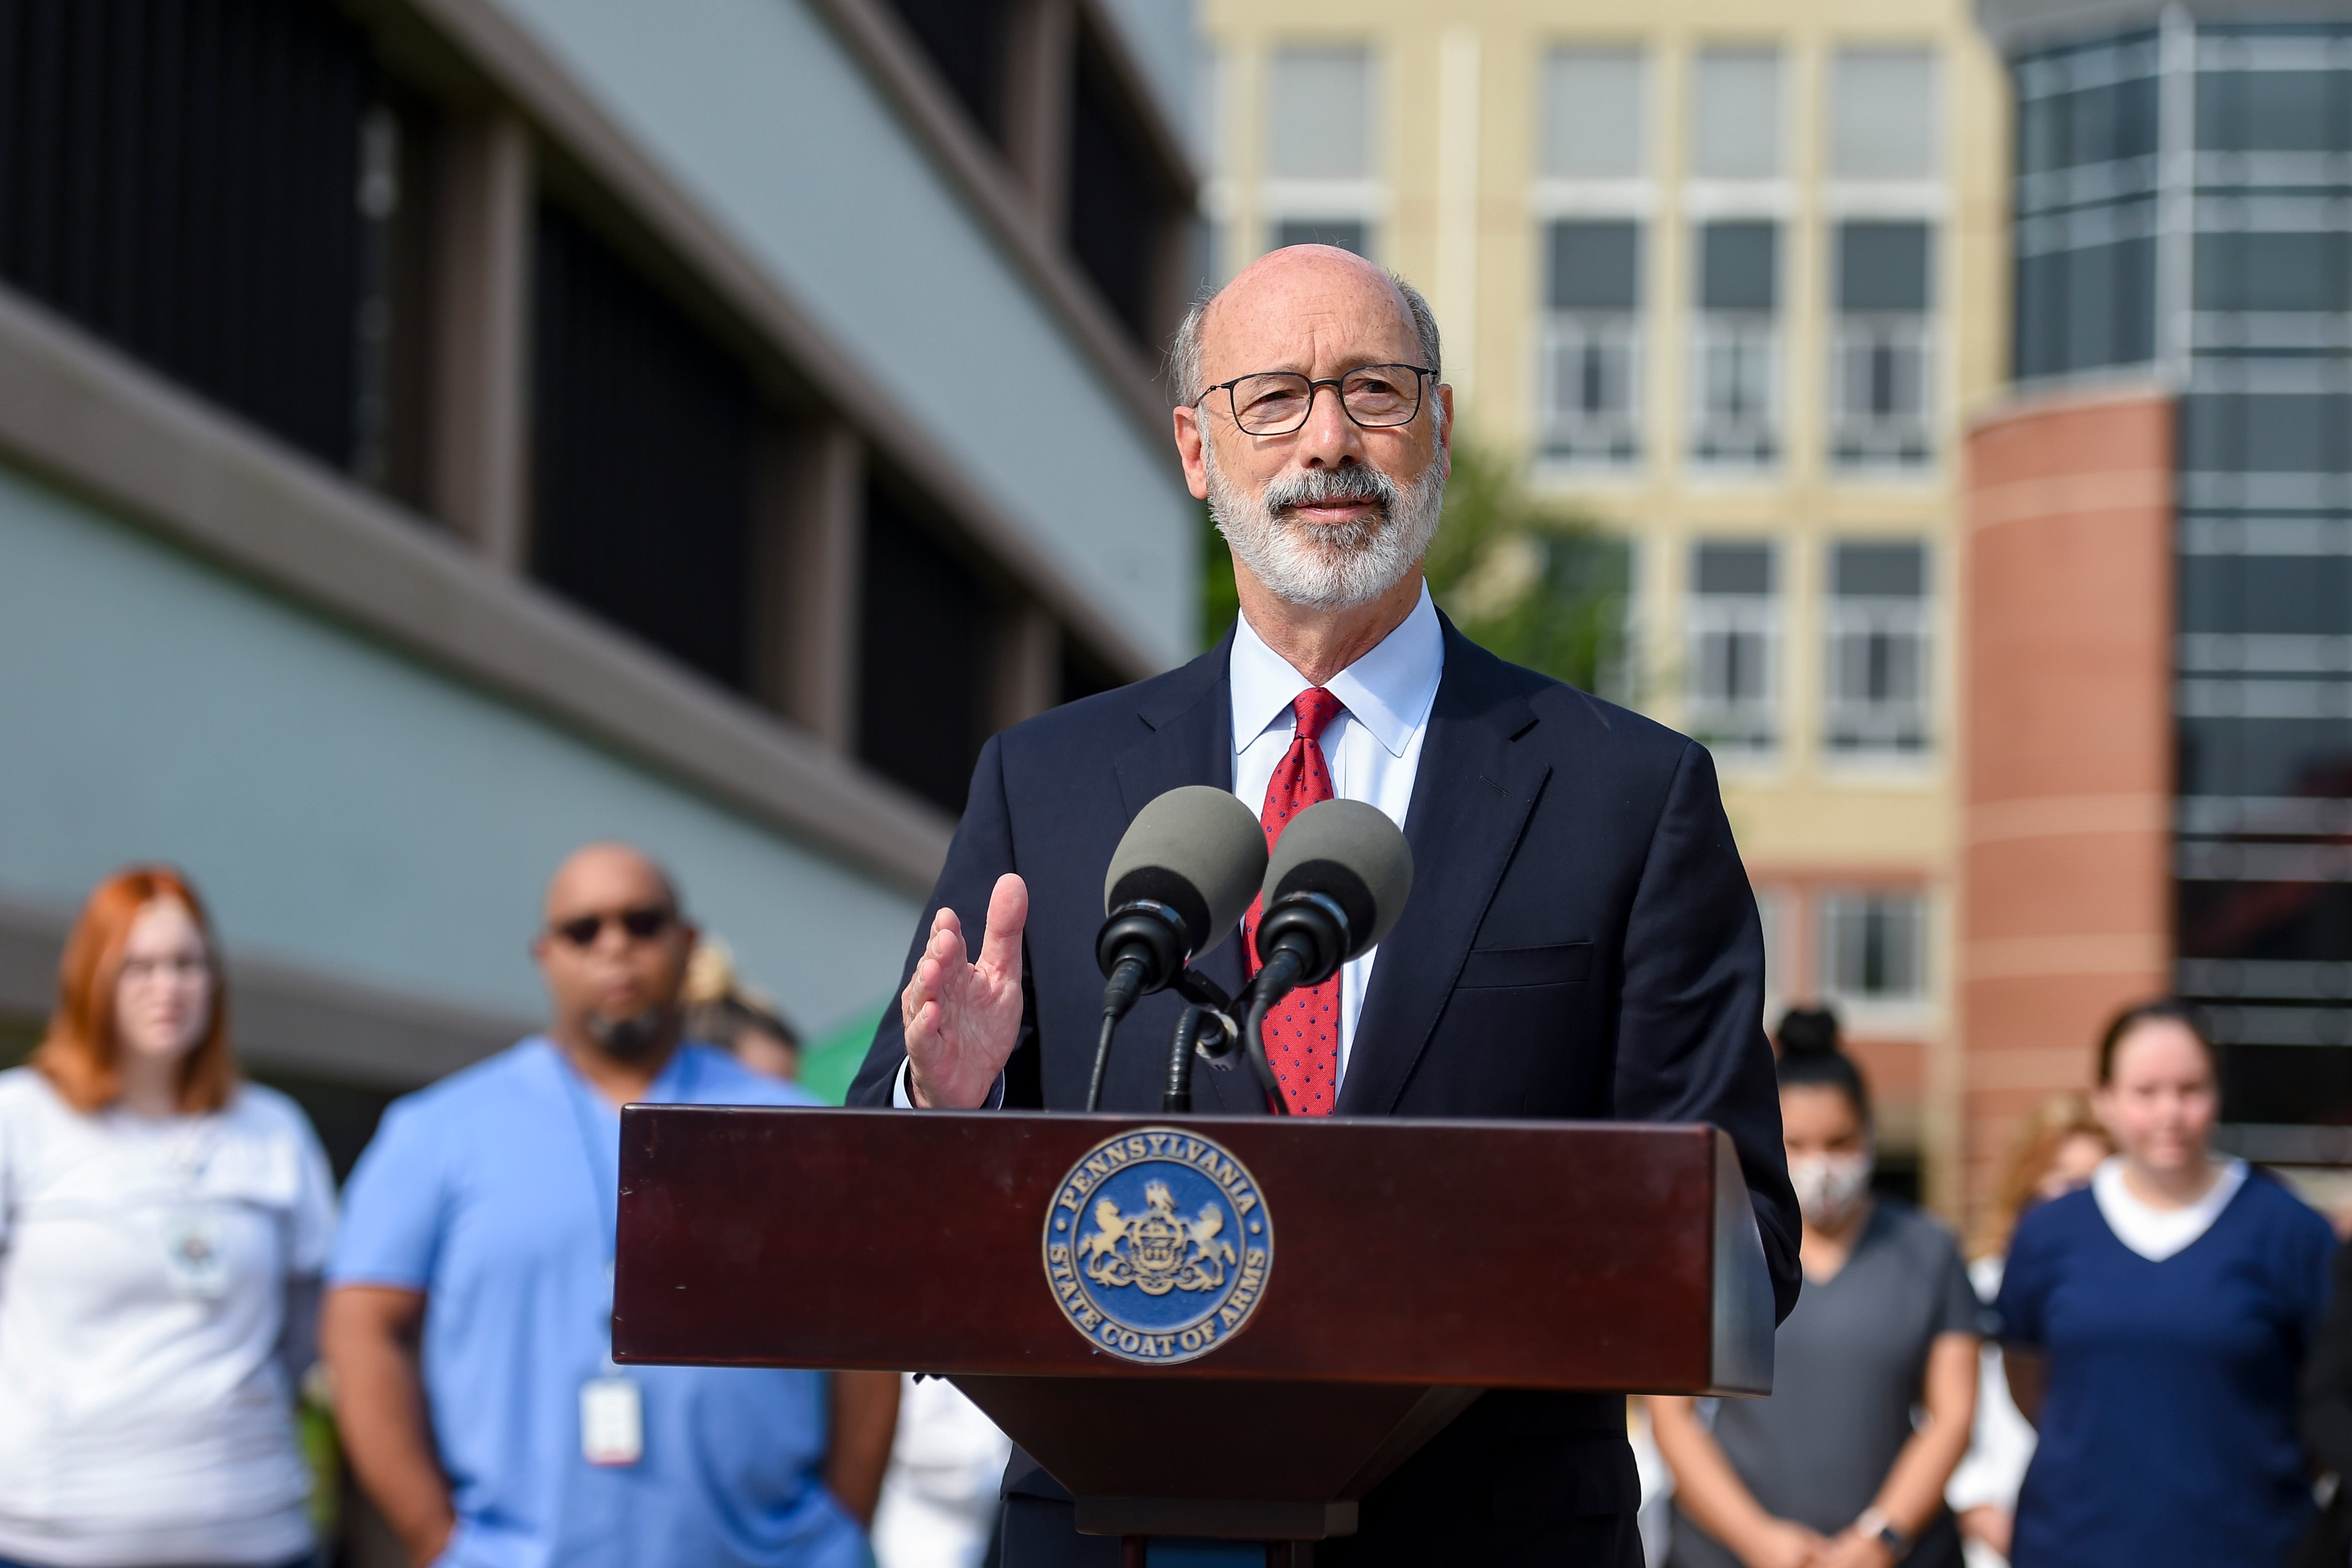 Pennsylvania Governor Tom Wolf speaks at a podium as people stand behind him.